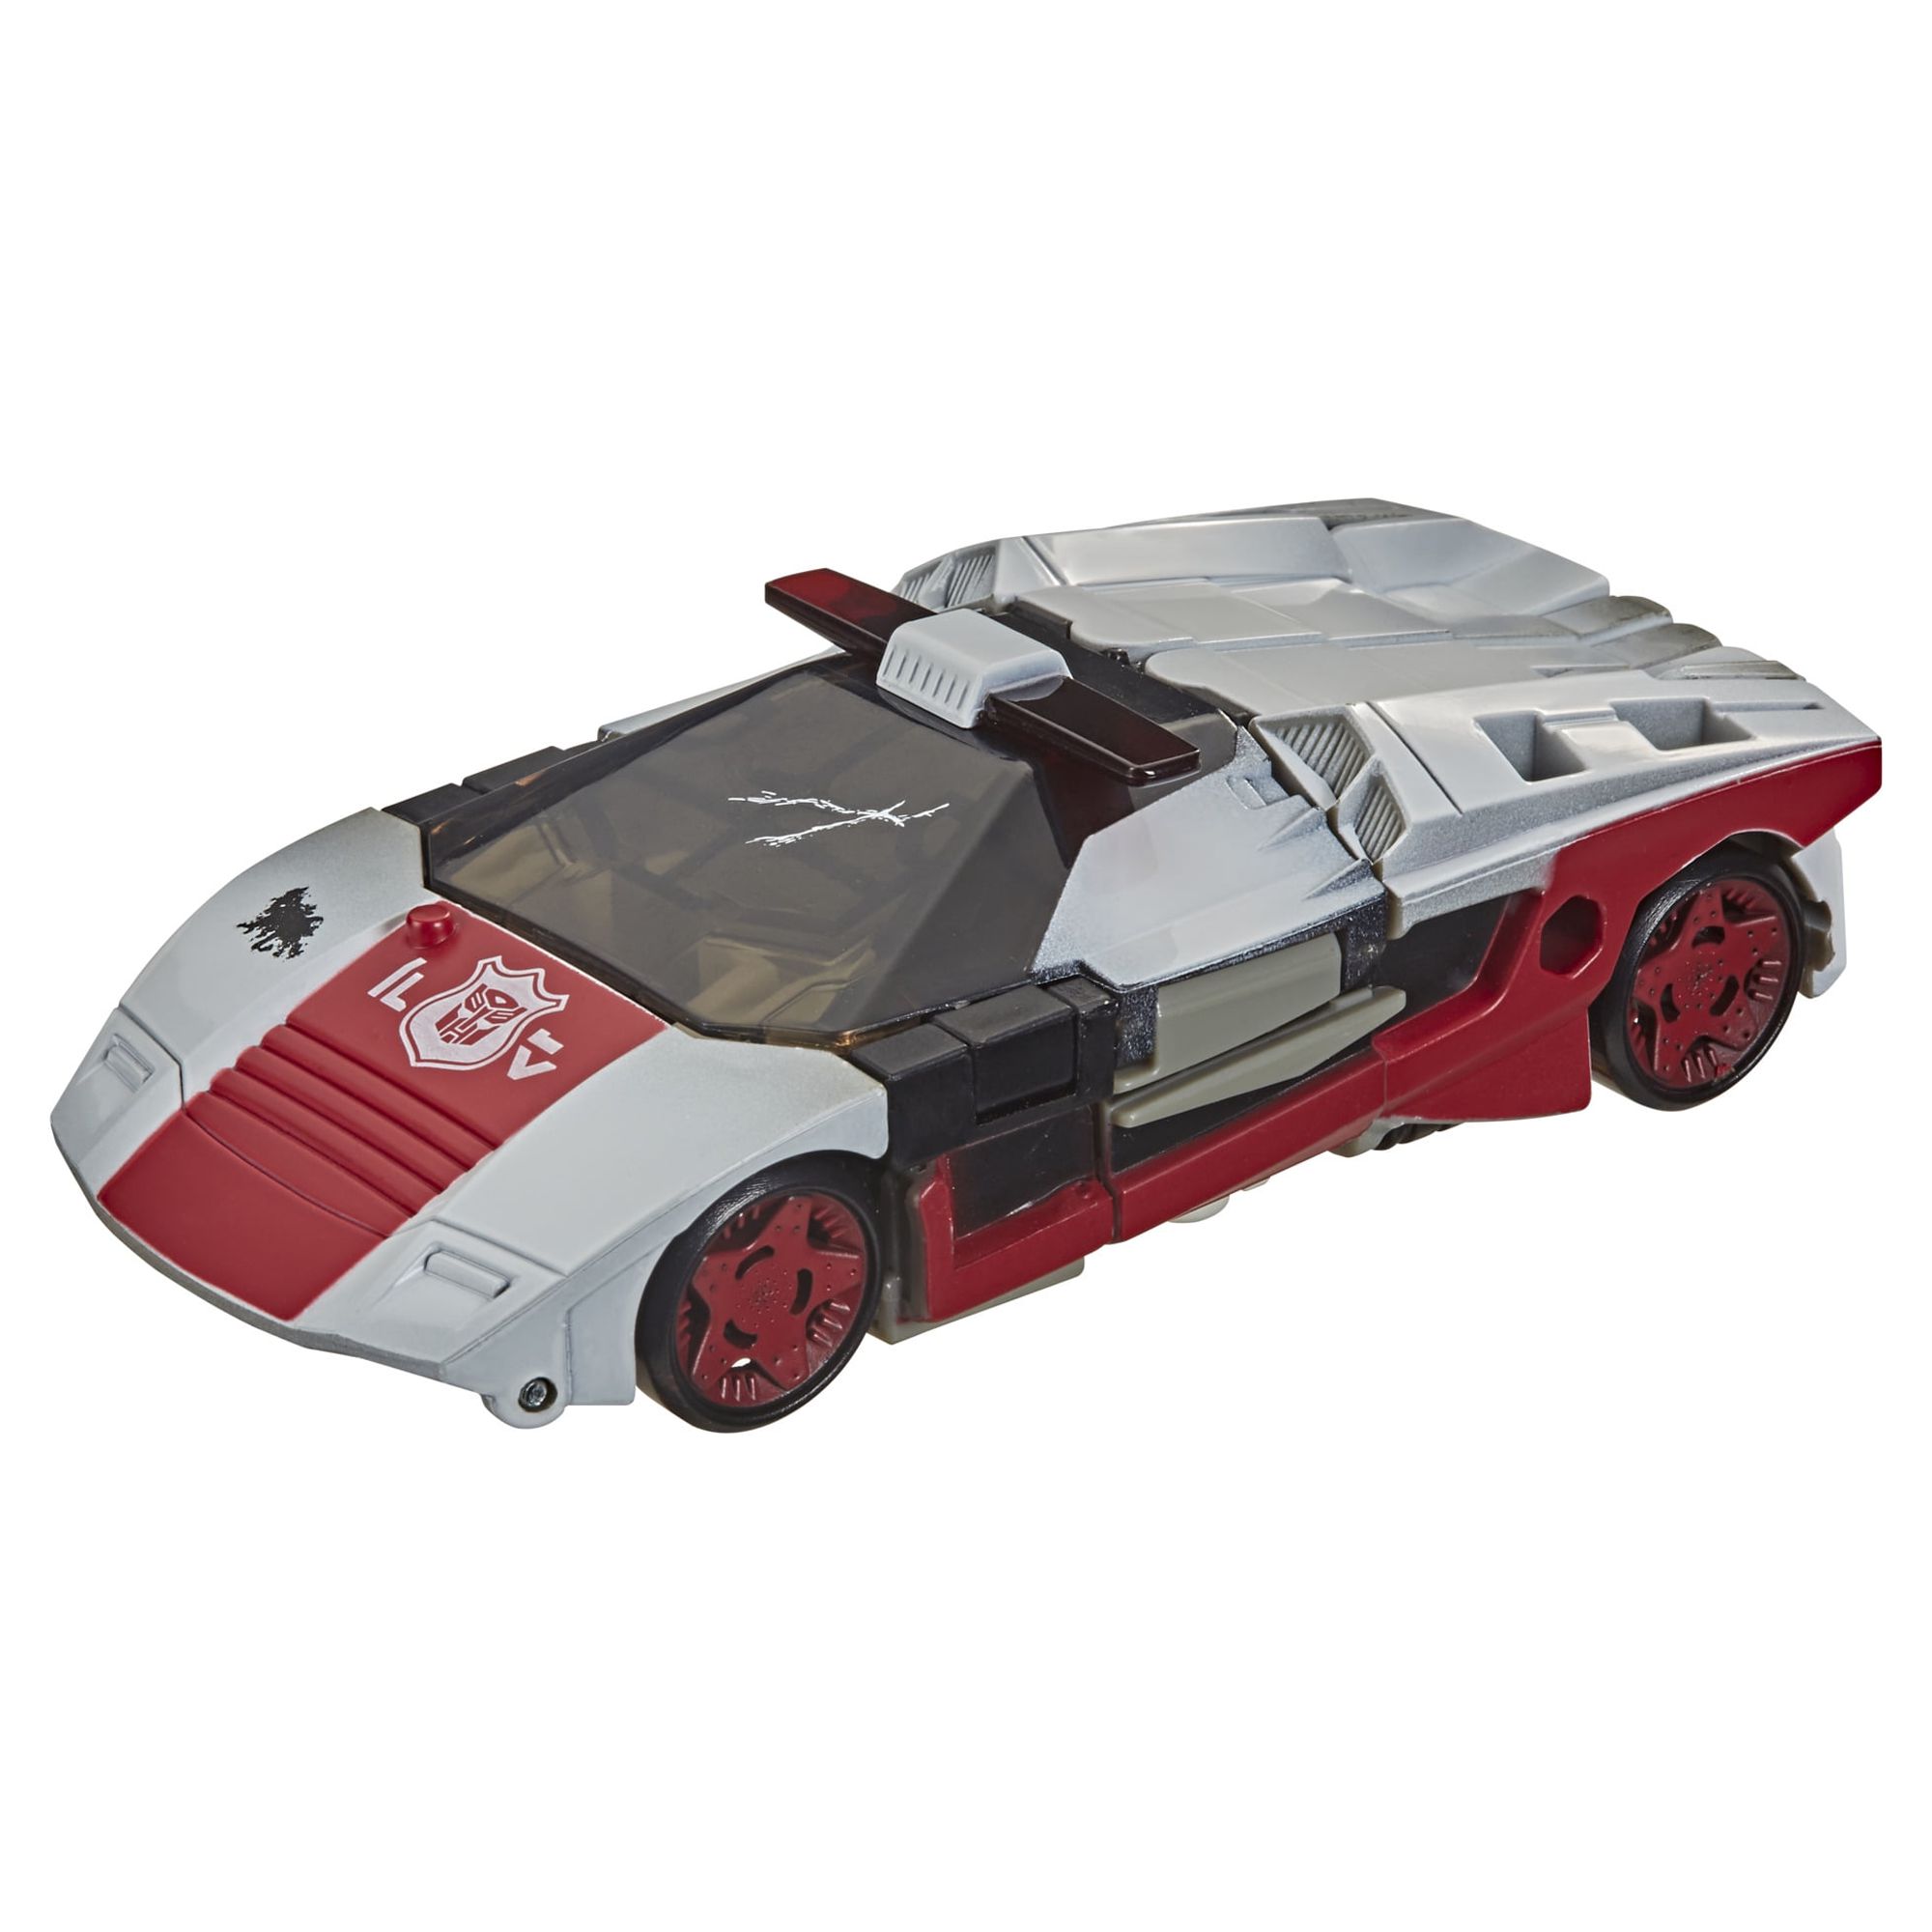 Transformers Generations War for Cybertron Series Deluxe Red Alert, Walmart Exclusive - image 2 of 6